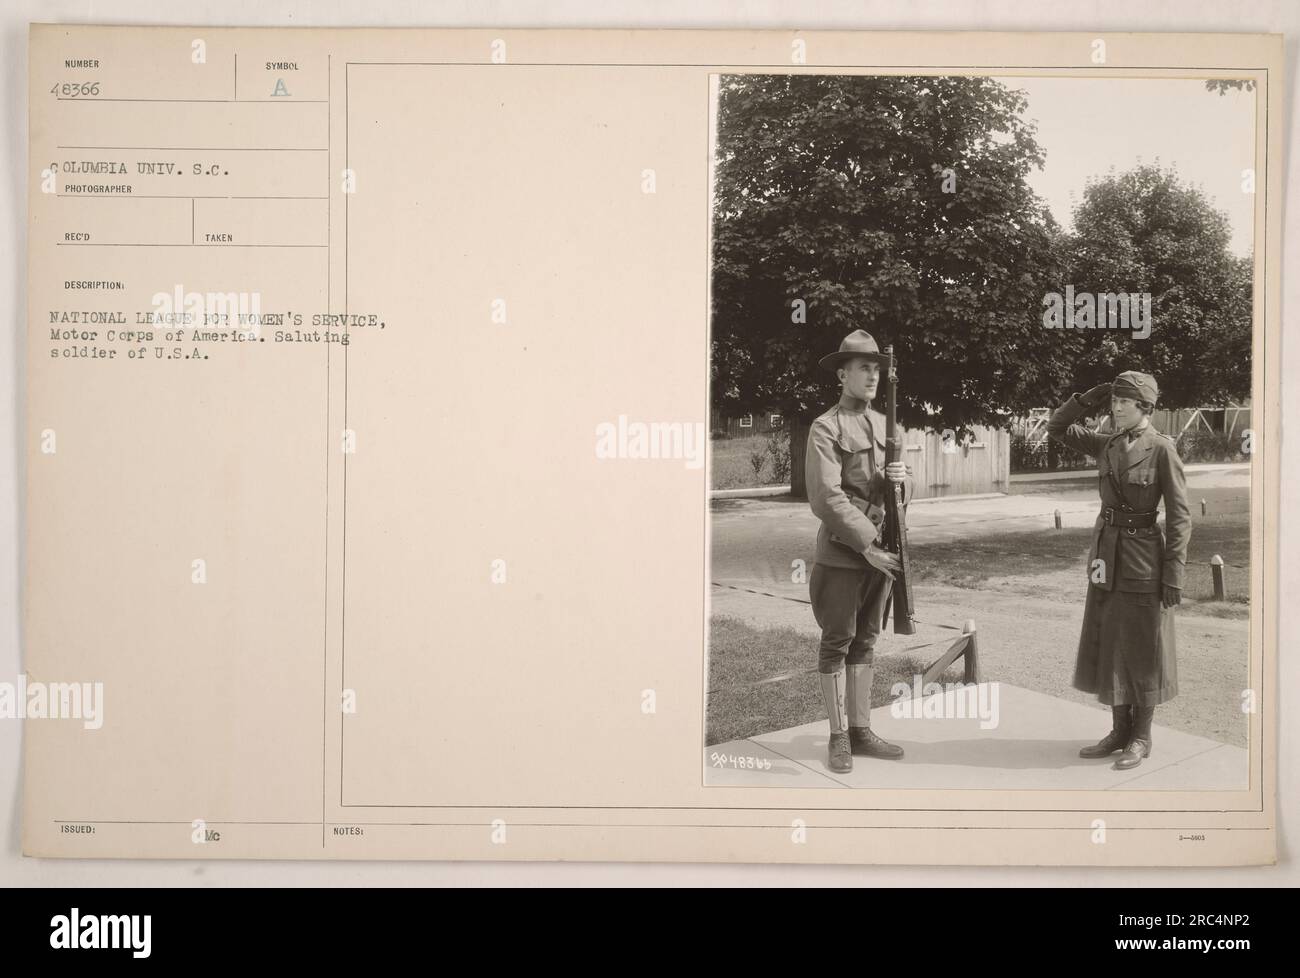 A member of the Motor Corps of America, affiliated with the National League for Women's Service, salutes a soldier of the U.S.A. The soldier's rifle number is 48366 and he represents Columbia University in South Carolina. This photograph was taken and issued by the National League for Women's Service, and bears the description 'SYMBO Mc NOTES 9048869.' Stock Photo